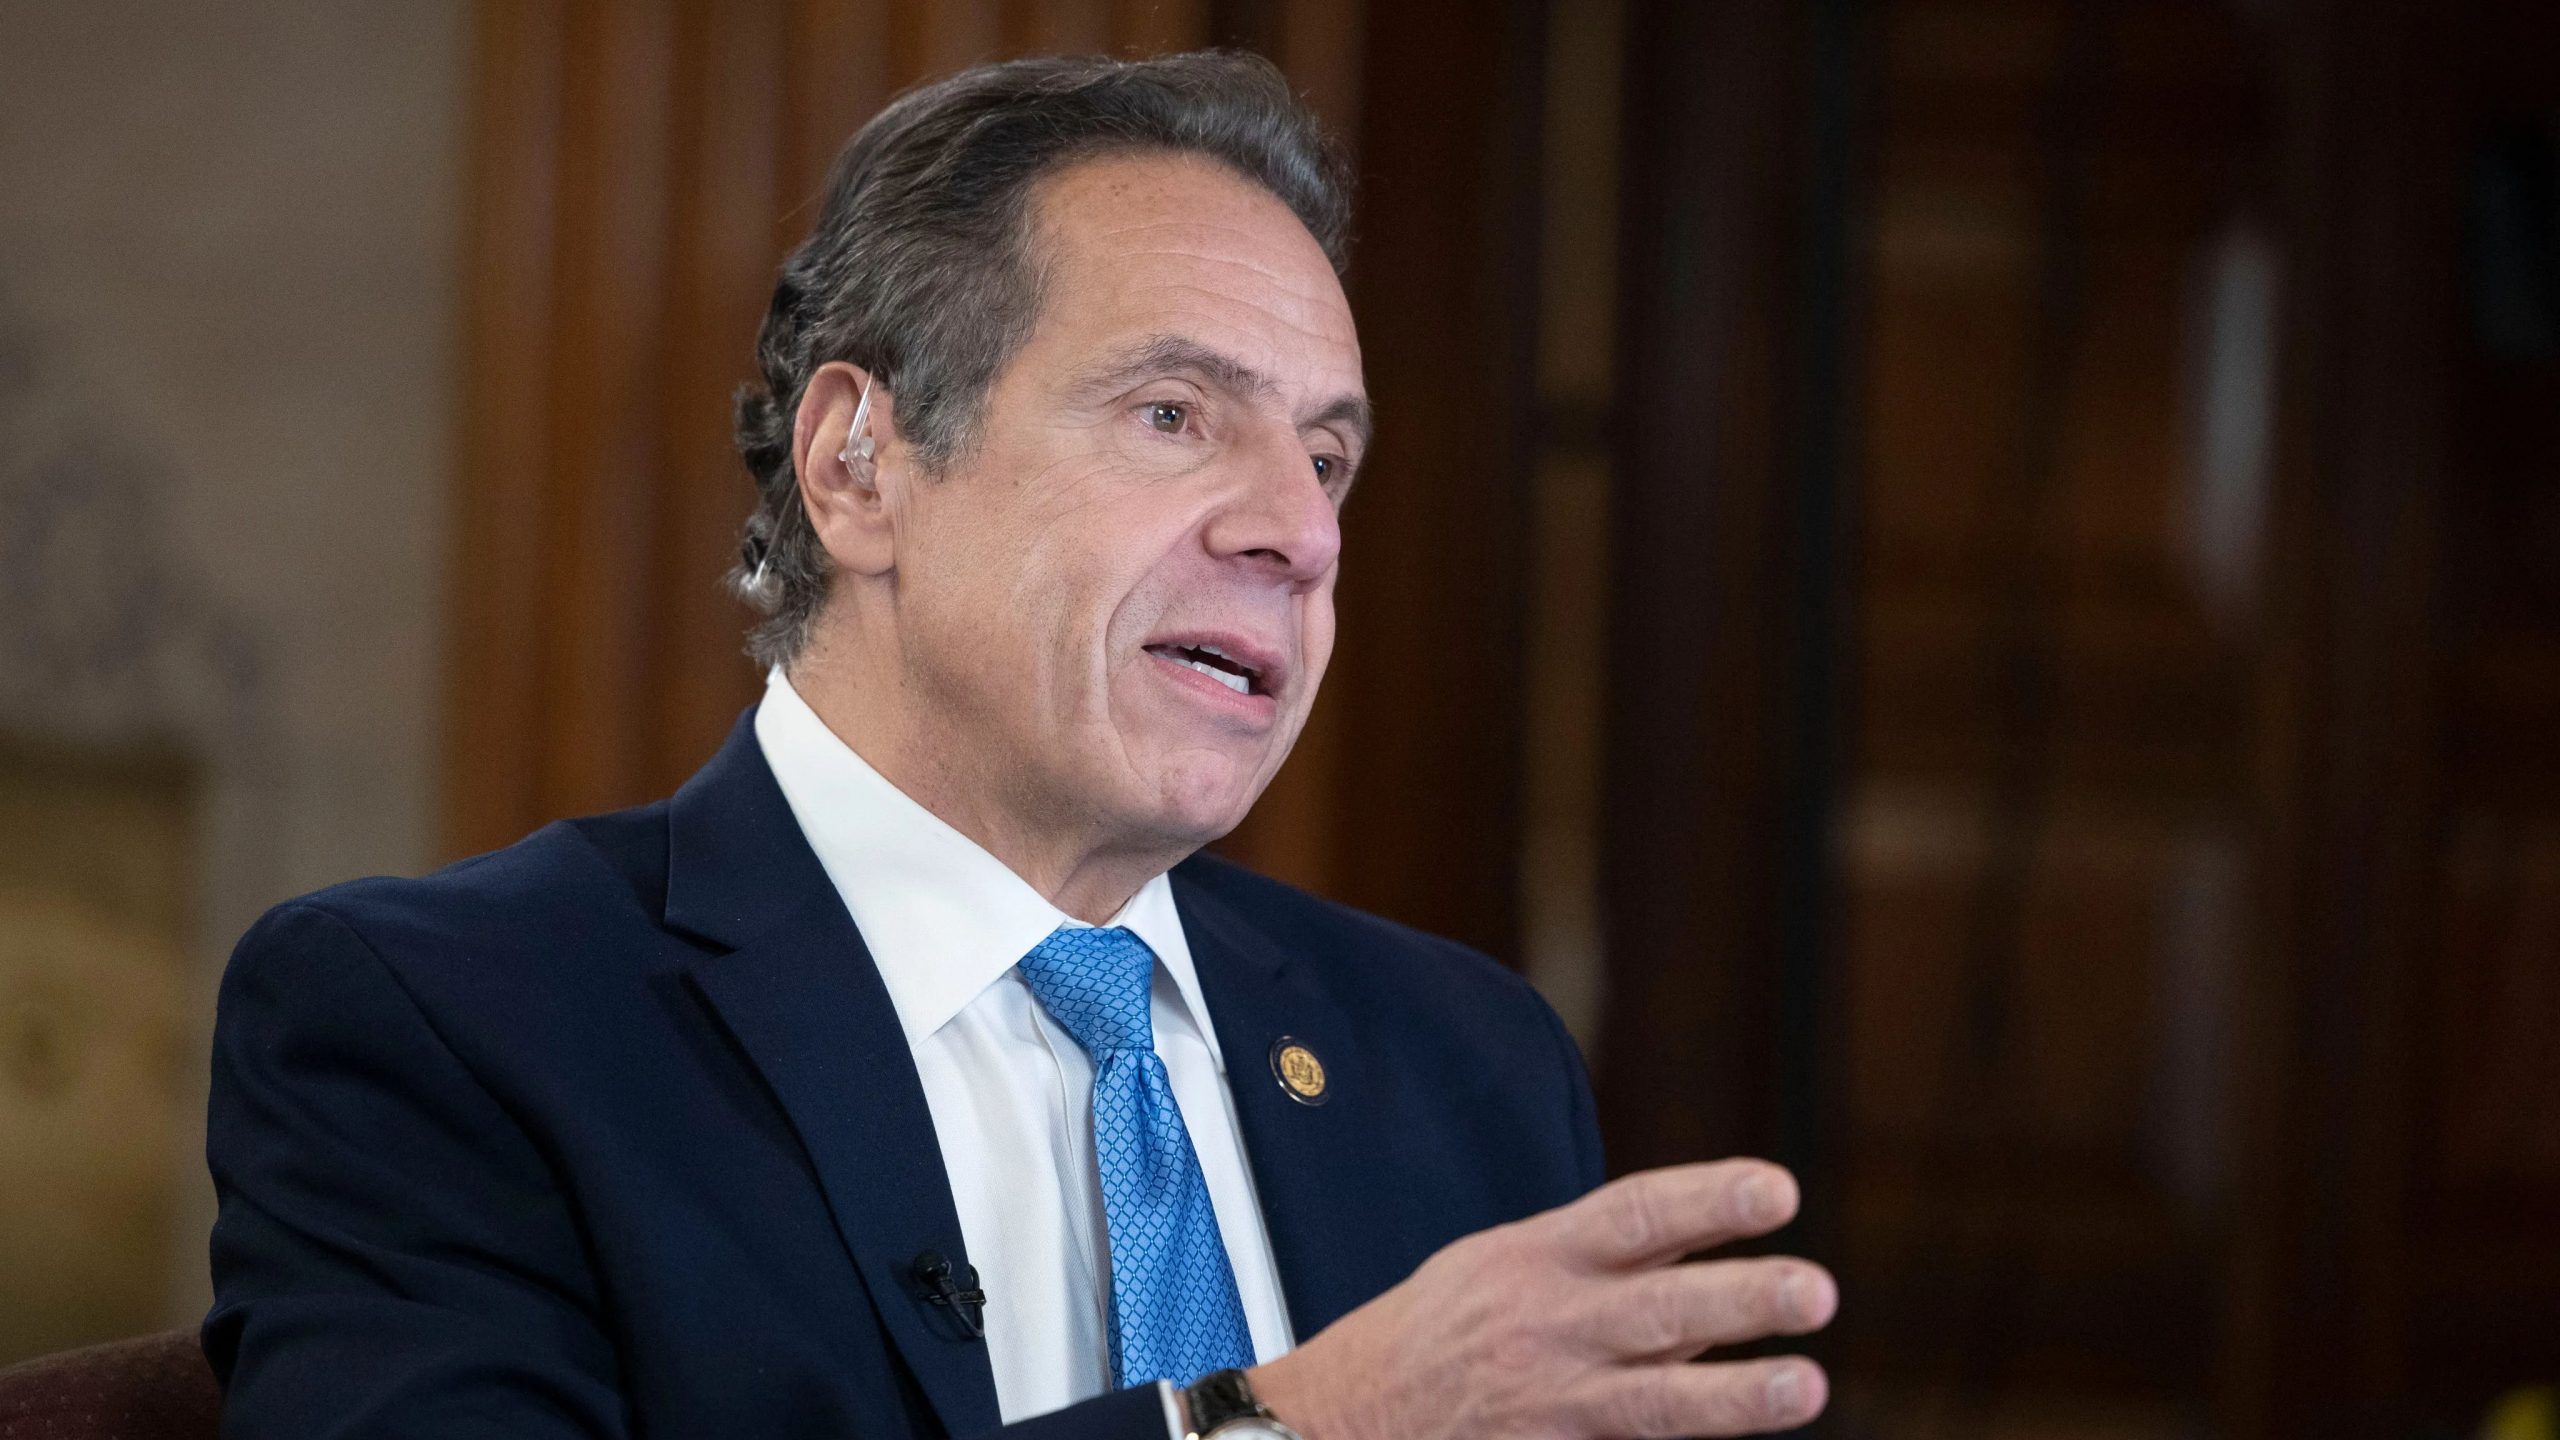 Andrew Cuomo: The New York Governor who is in a sexual harassment stir